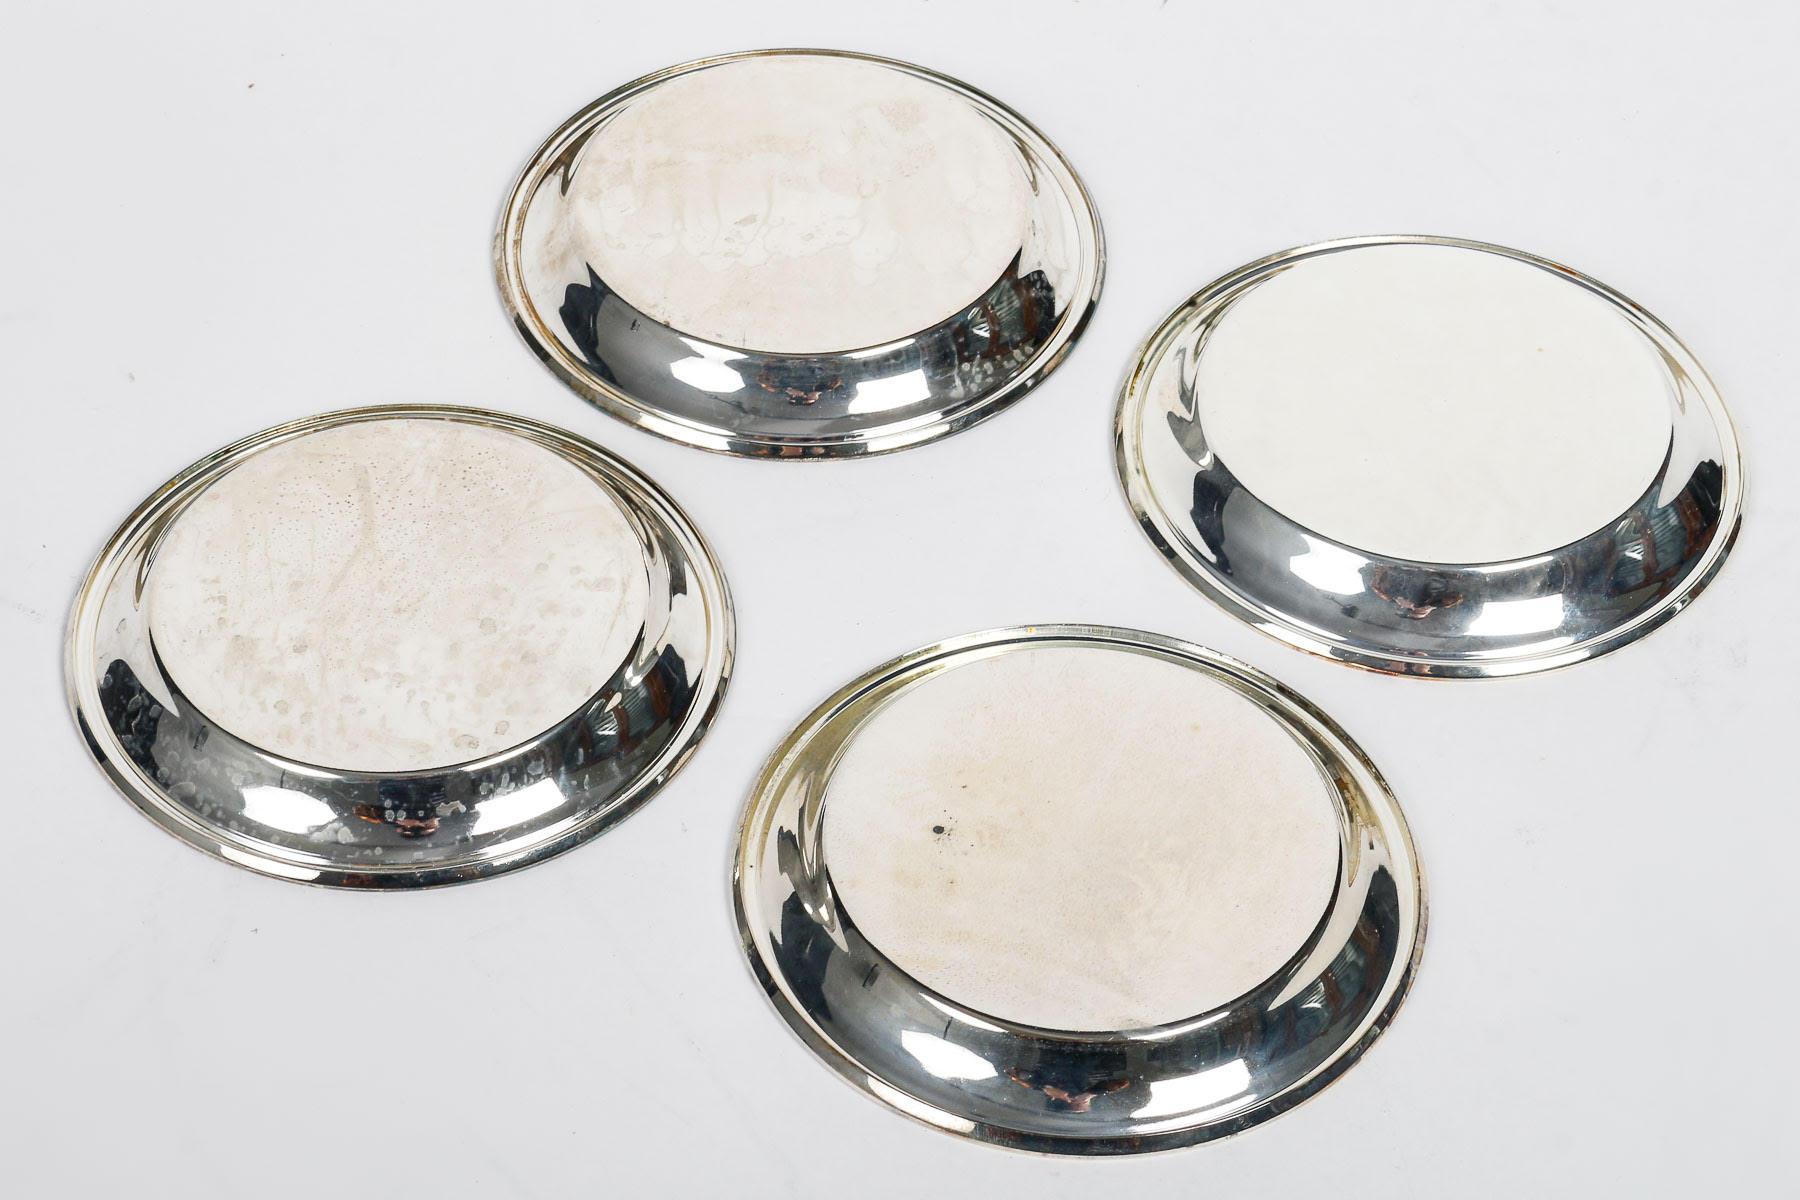 French Set of 4 Champagne Coasters in Silver-Plated Metal, 20th Century.